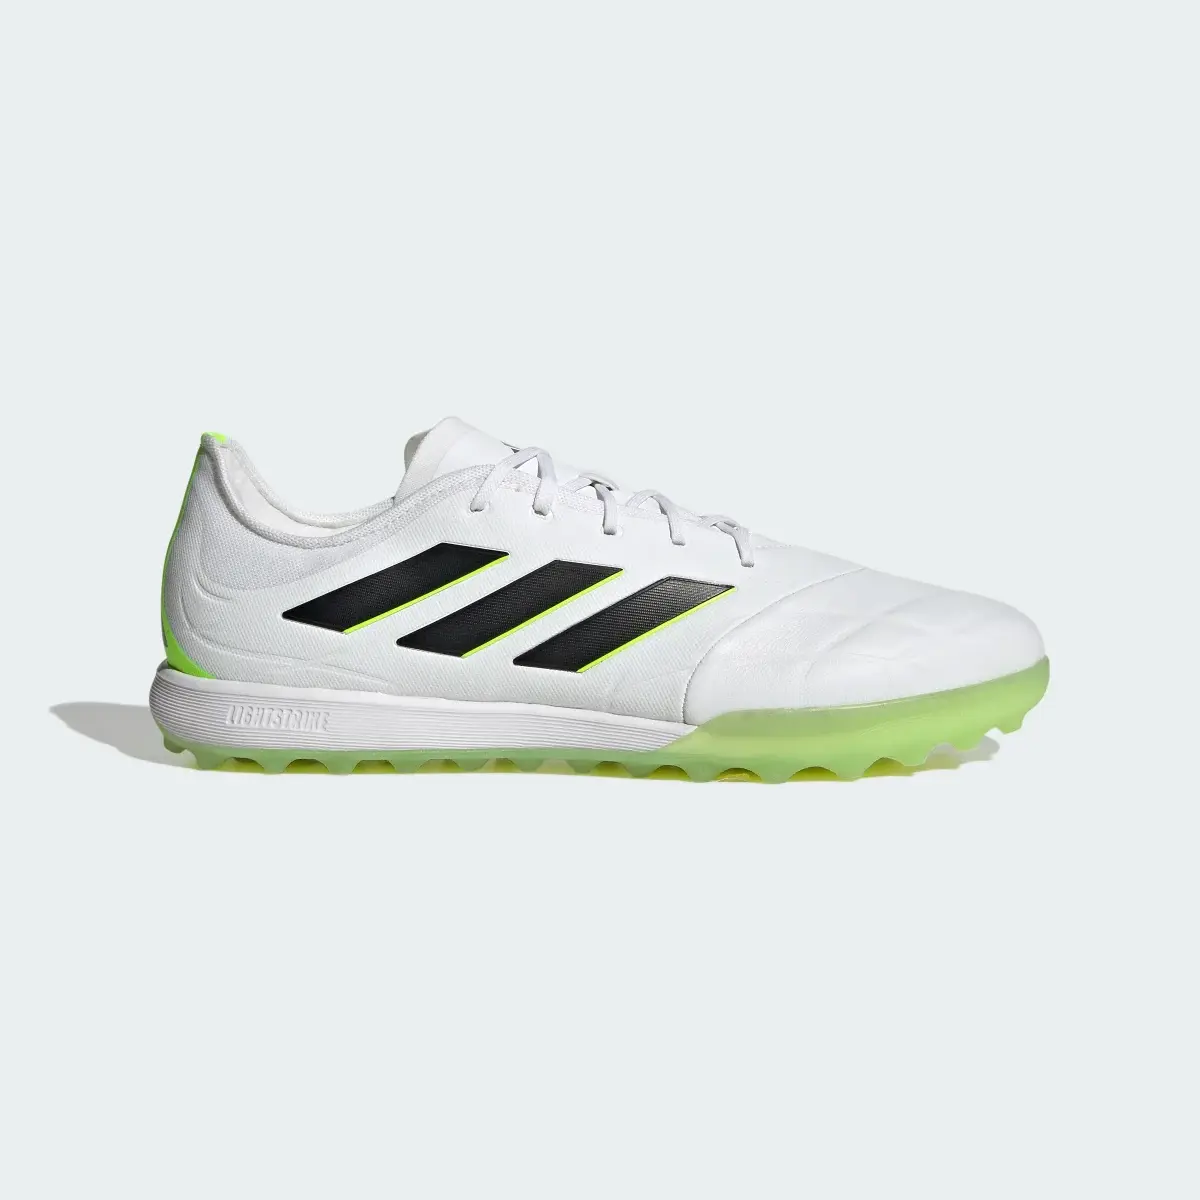 Adidas Copa Pure.1 Turf Boots. 2